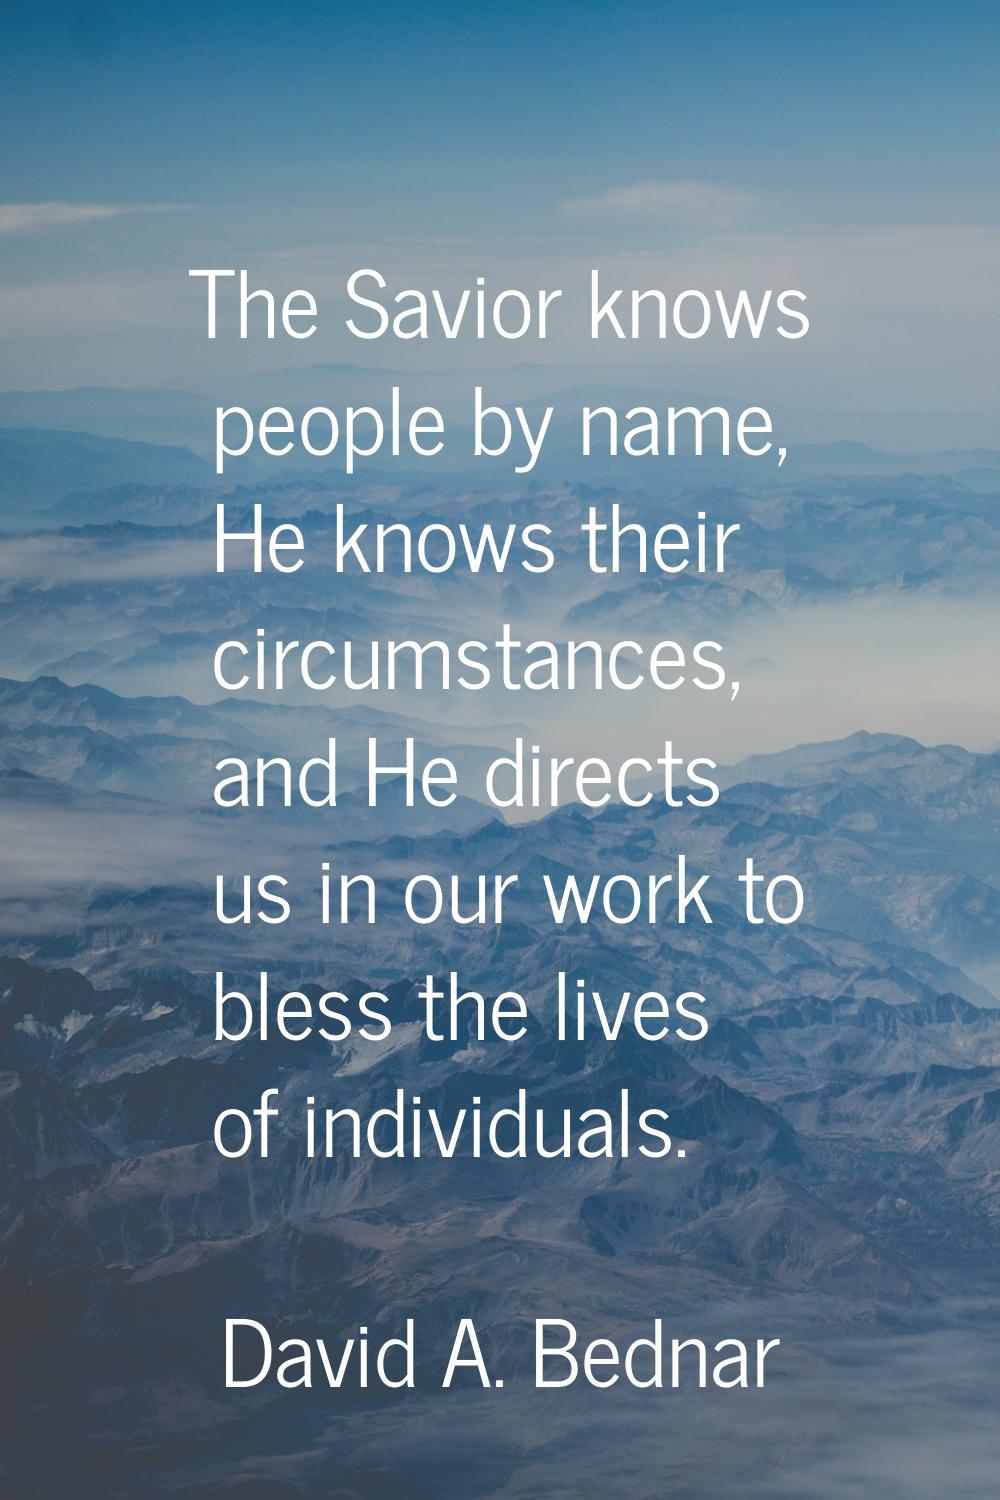 The Savior knows people by name, He knows their circumstances, and He directs us in our work to ble